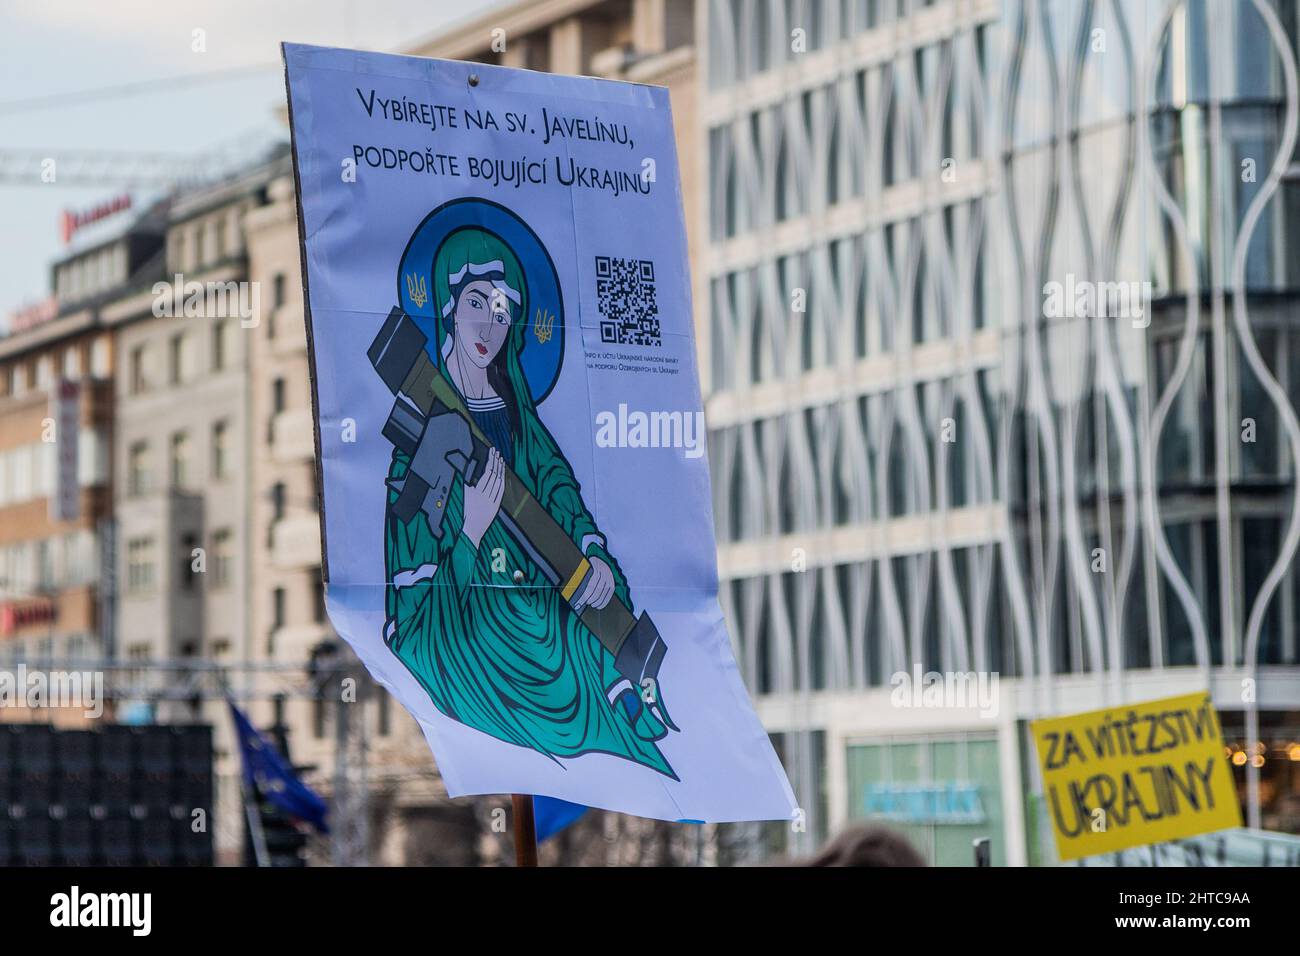 PRAGUE, CZECH REPUBLIC - FEBRUARY 27, 2022: Poster at the protest against Russian invasion of Ukraine on the Wenceslas Square in Prague, Czech Republi Stock Photo